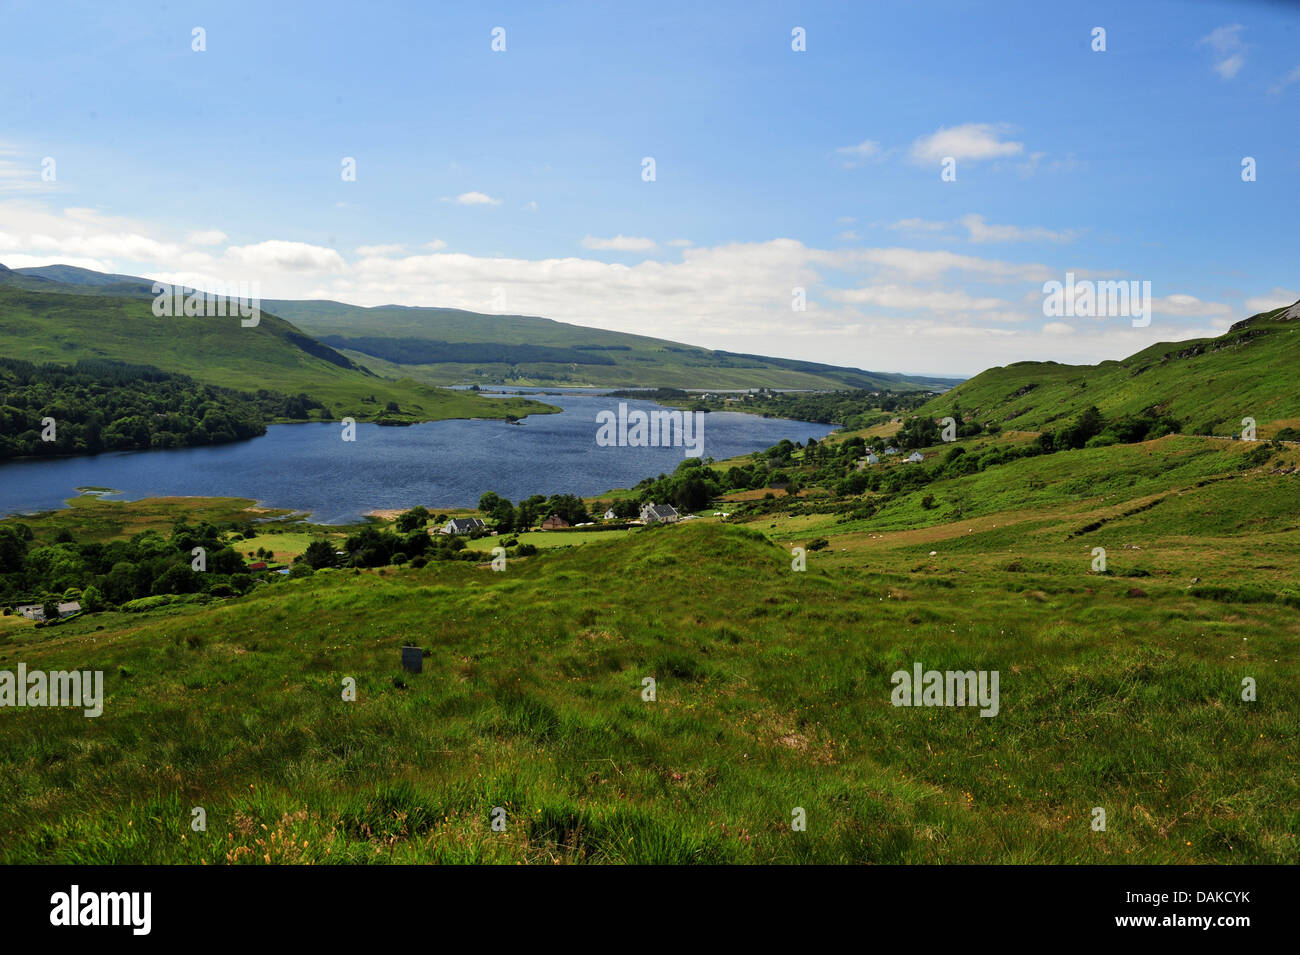 Poisoned Glen and Lough Na Kung,County Donegal, Ireland. Stock Photo